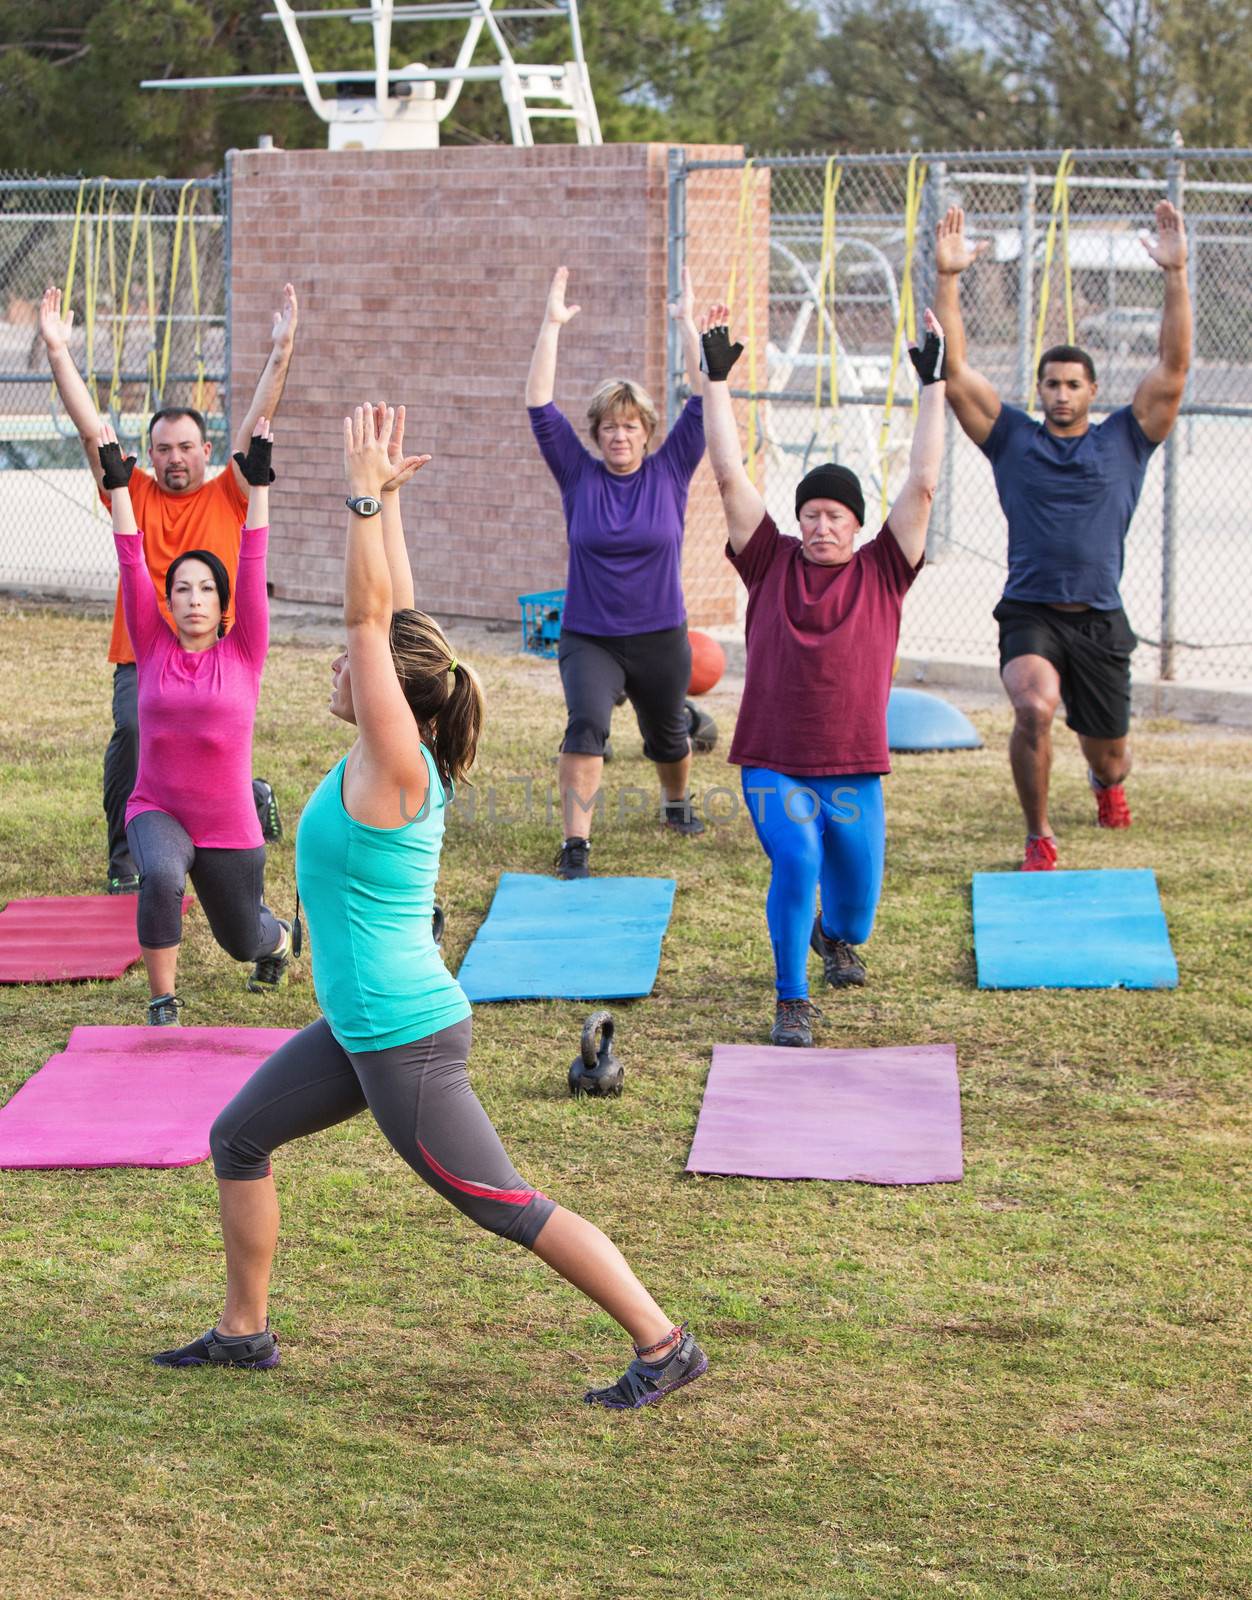 Mature adult boot camp exercise group stretching outdoors